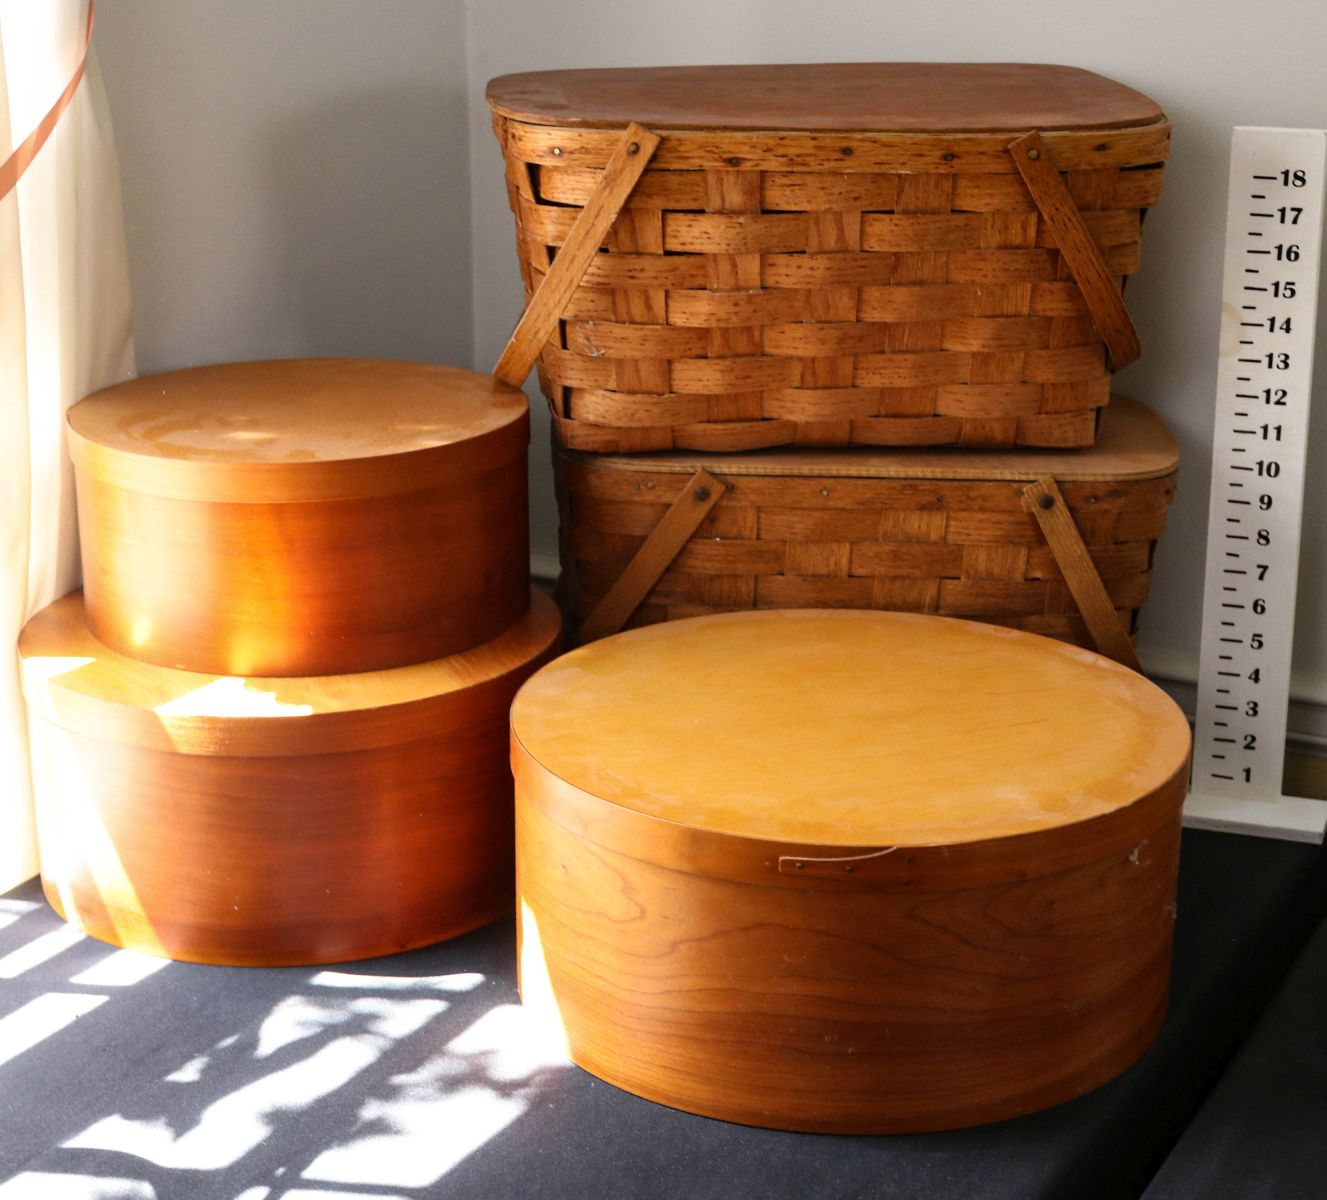 SHAKER-STYLE BAND BOXES AND PICNIC BASKETS